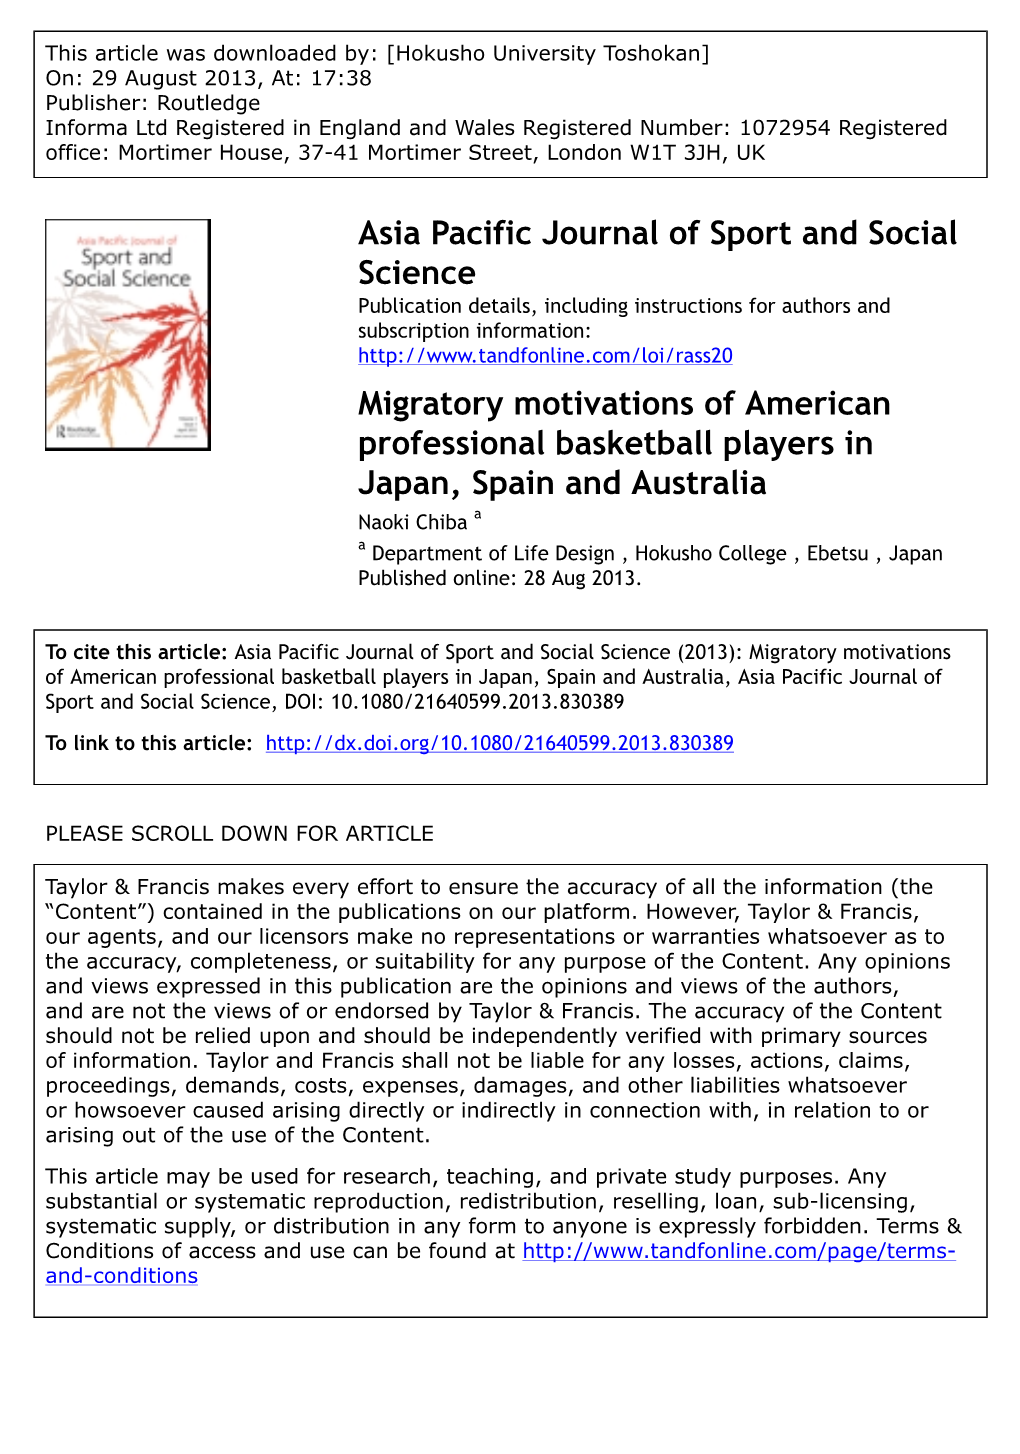 Migratory Motivations of American Professional